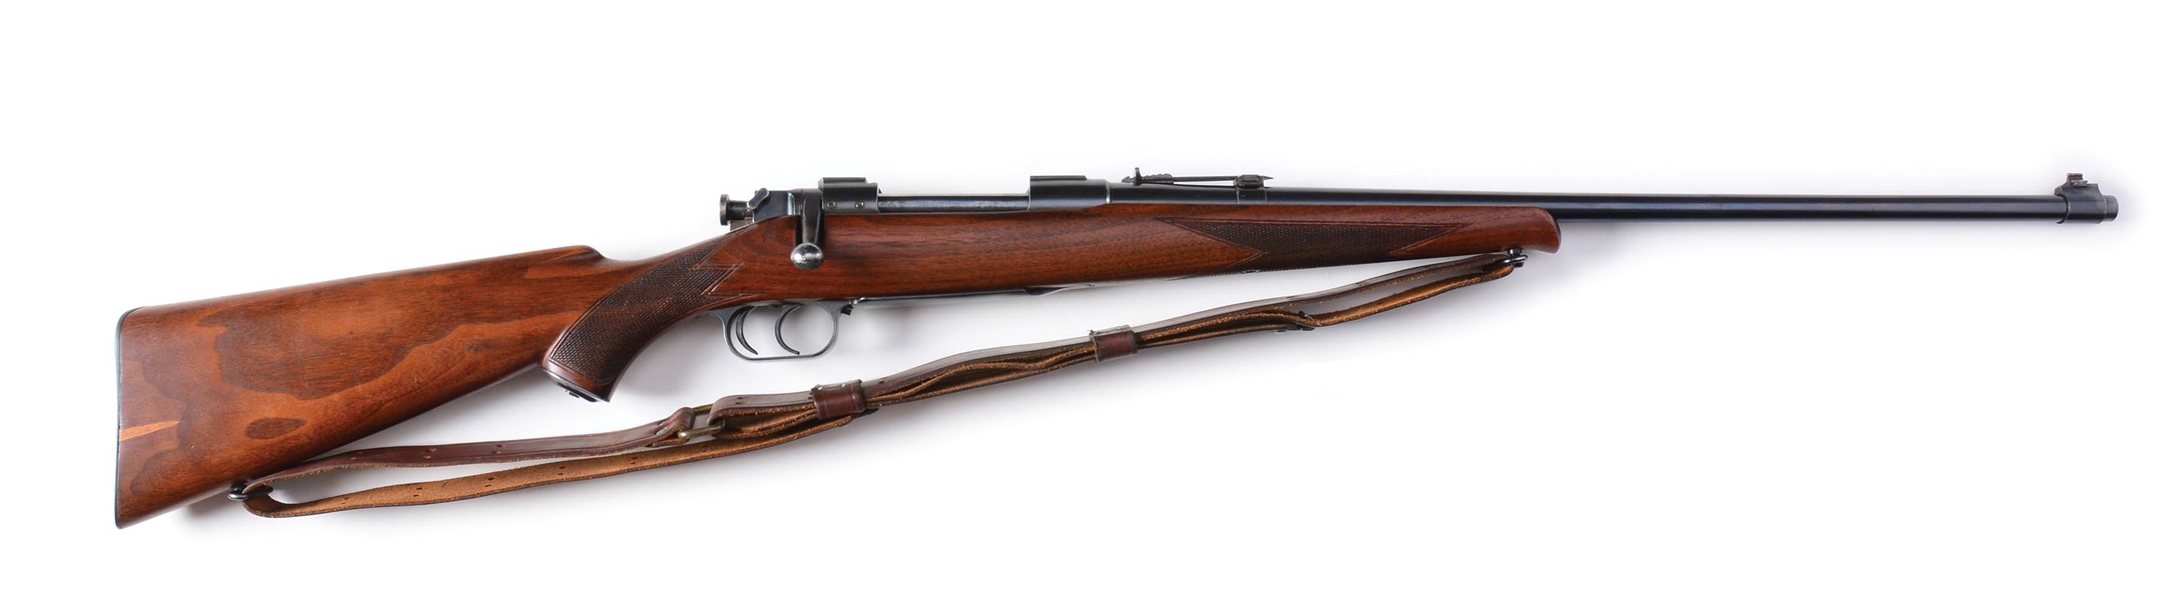 (C) NEWTON ARMS MODEL 1916 BOLT ACTION SPORTING RIFLE.